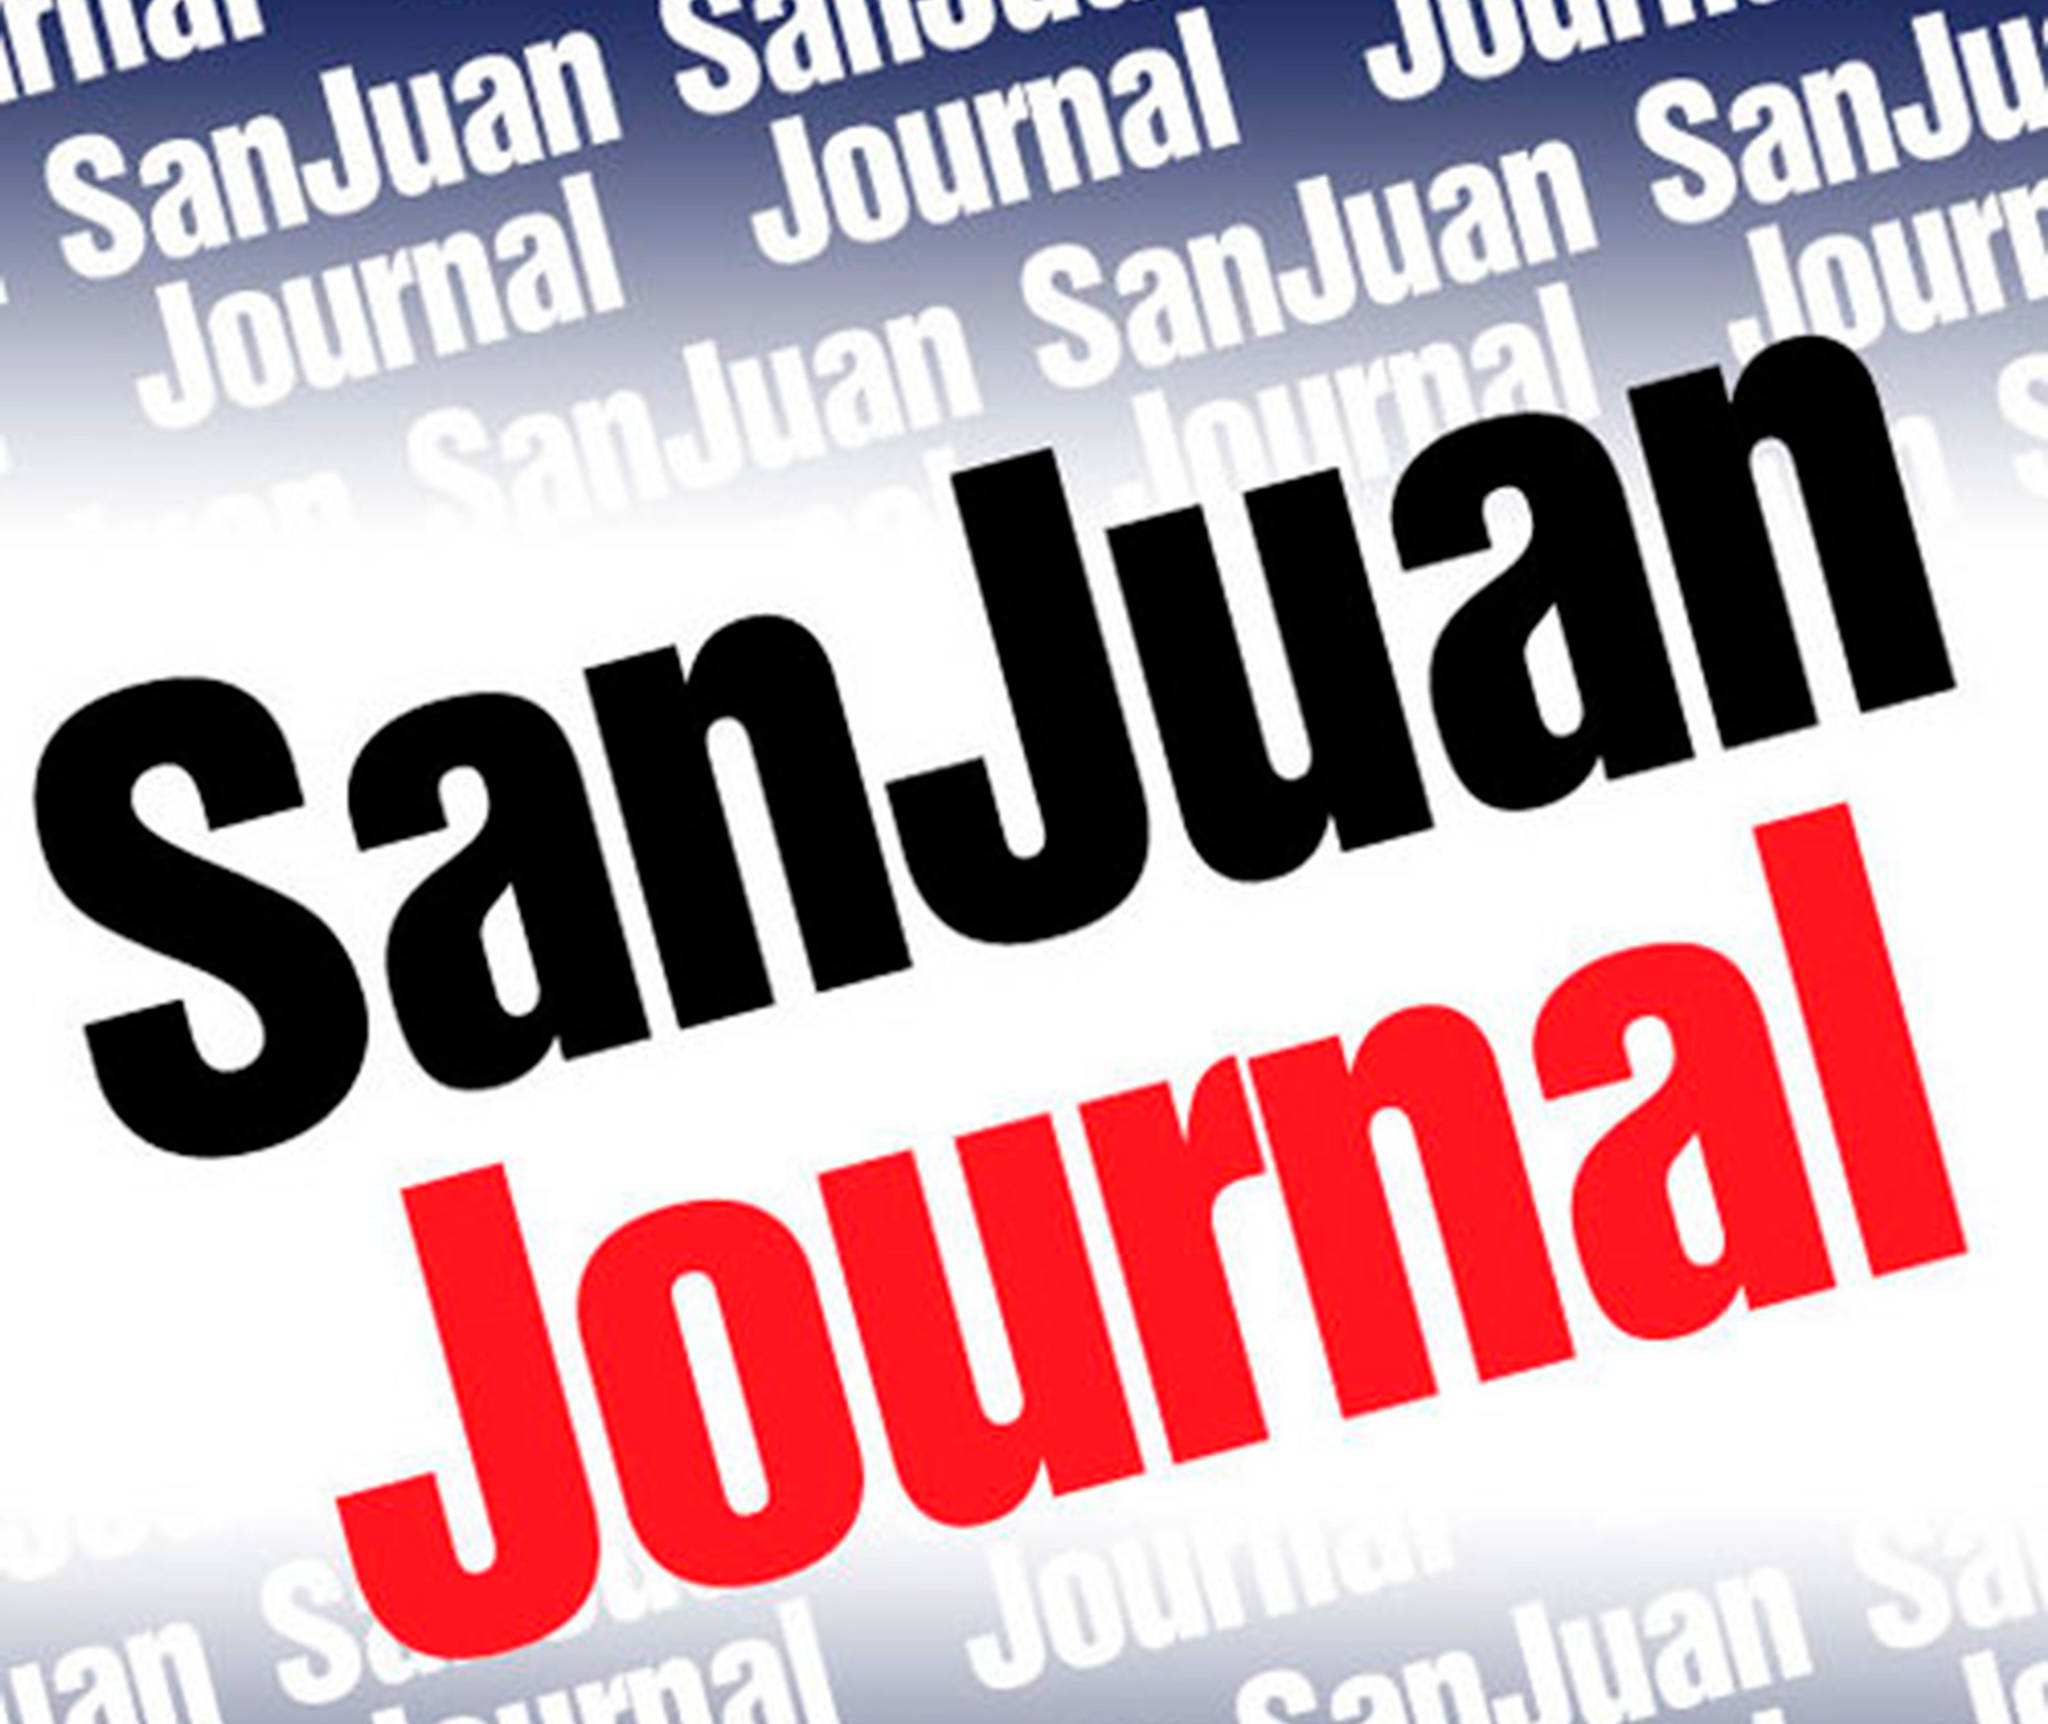 Why the Journal endorses candidates | Editorial